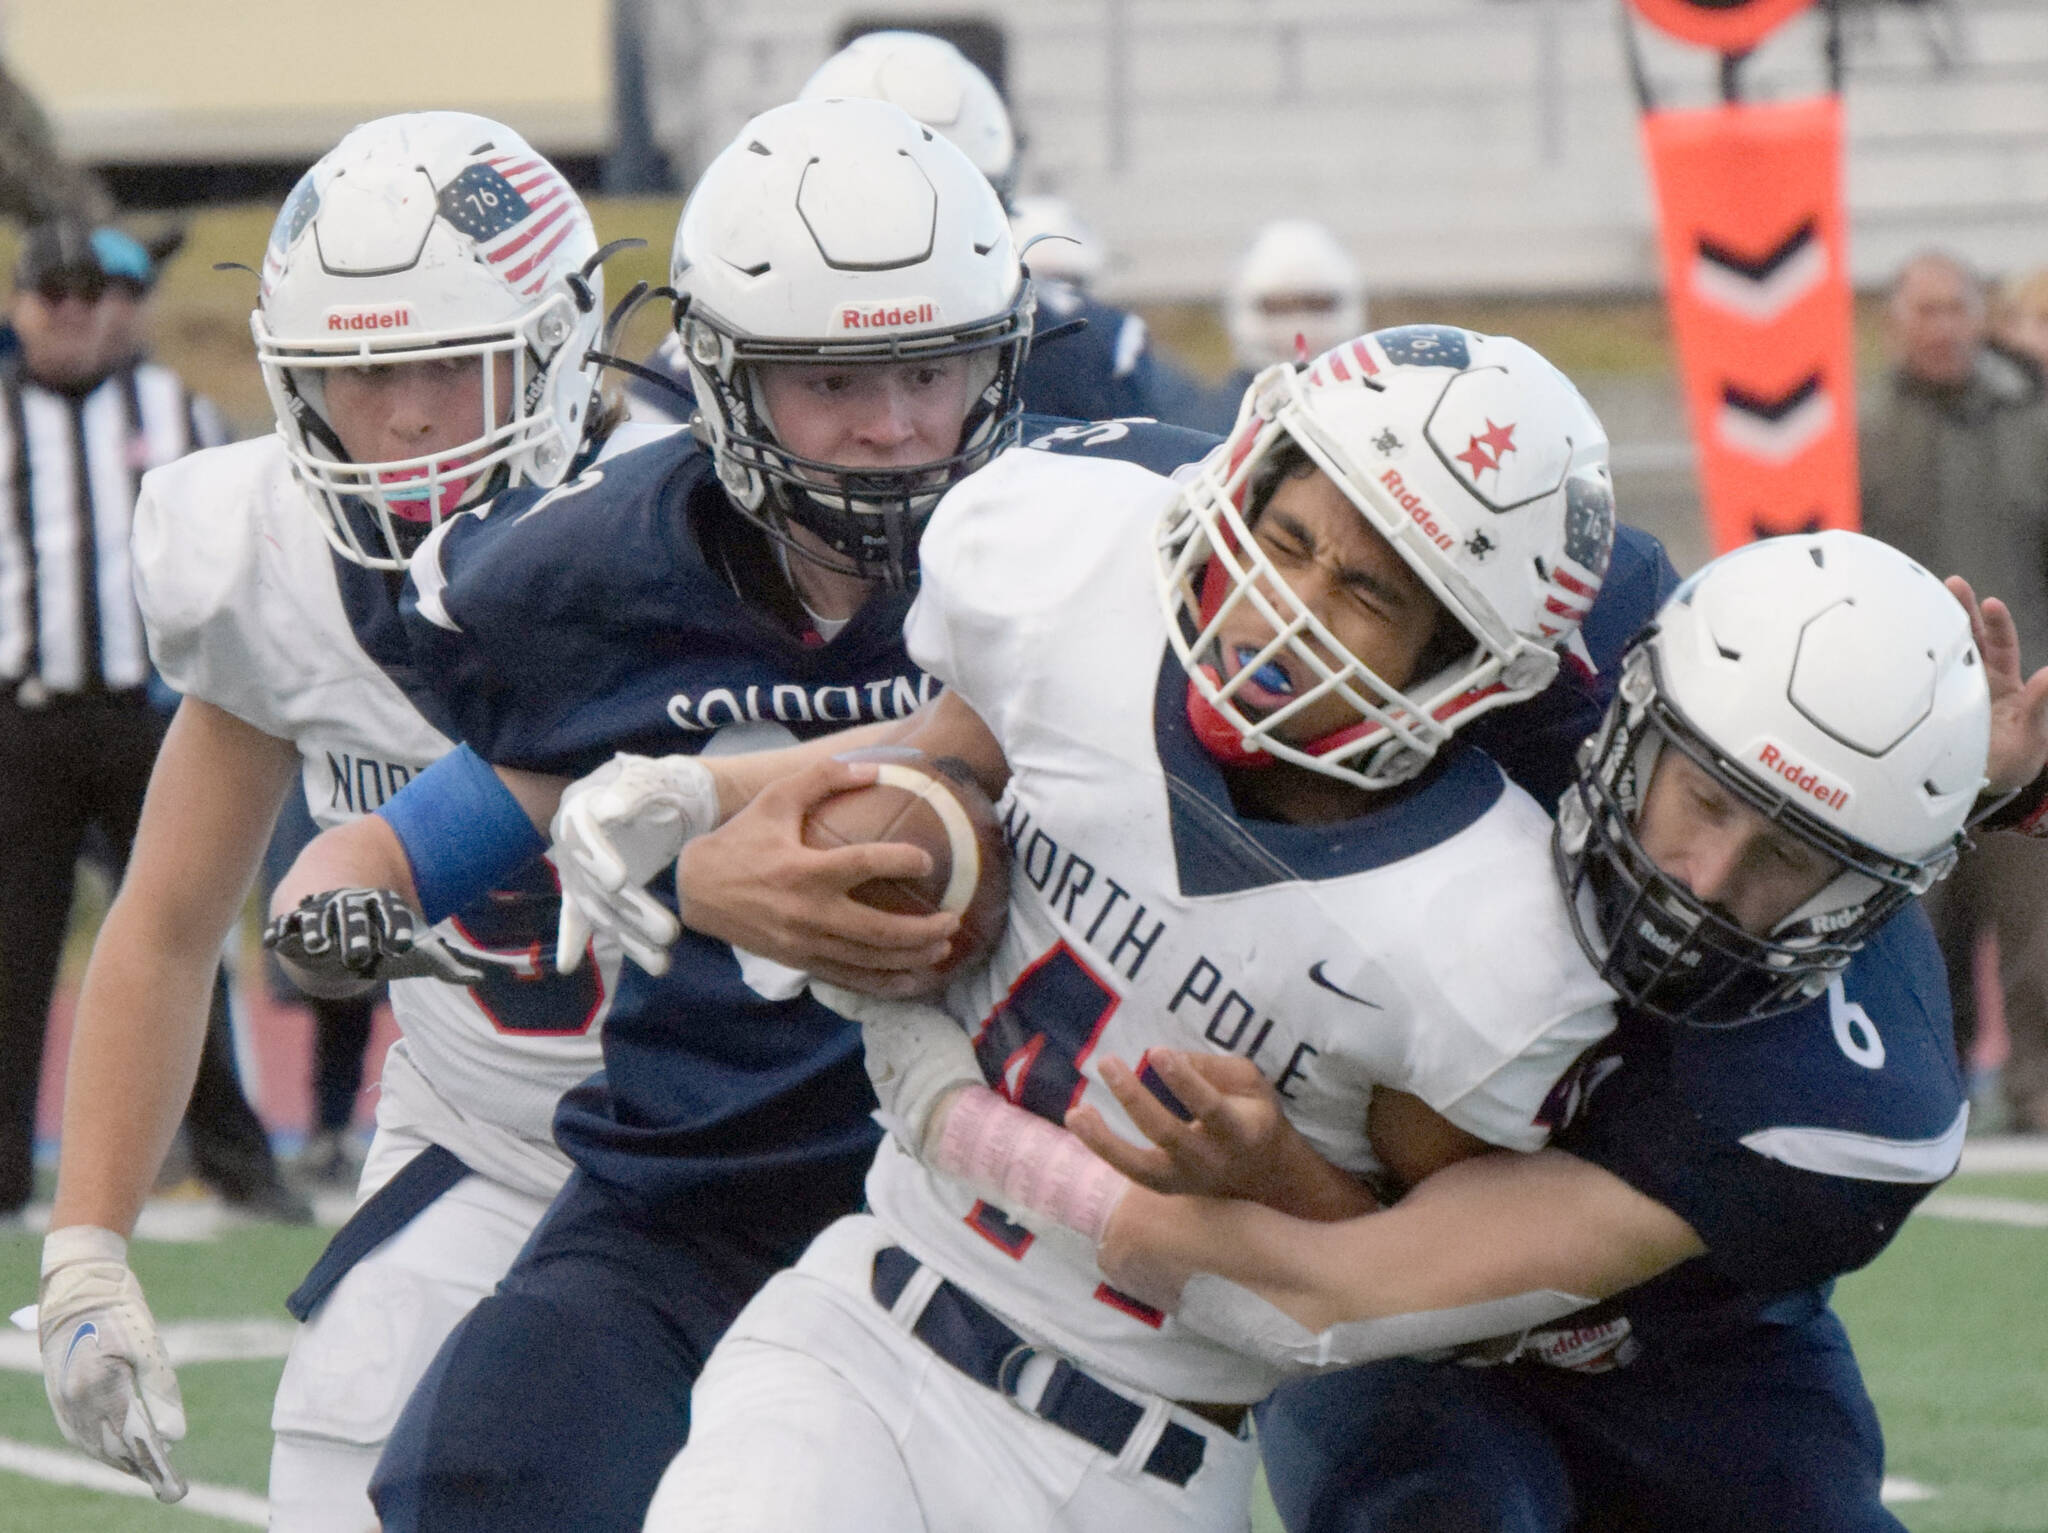 Soldotna’s Jeren Nash and Wayne Mellon combine to bring down Via Skipps of North Pole on Friday, Oct. 8, 2021, at Justin Maile Field in Soldotna, Alaska. (Photo by Jeff Helminiak/Peninsula Clarion)